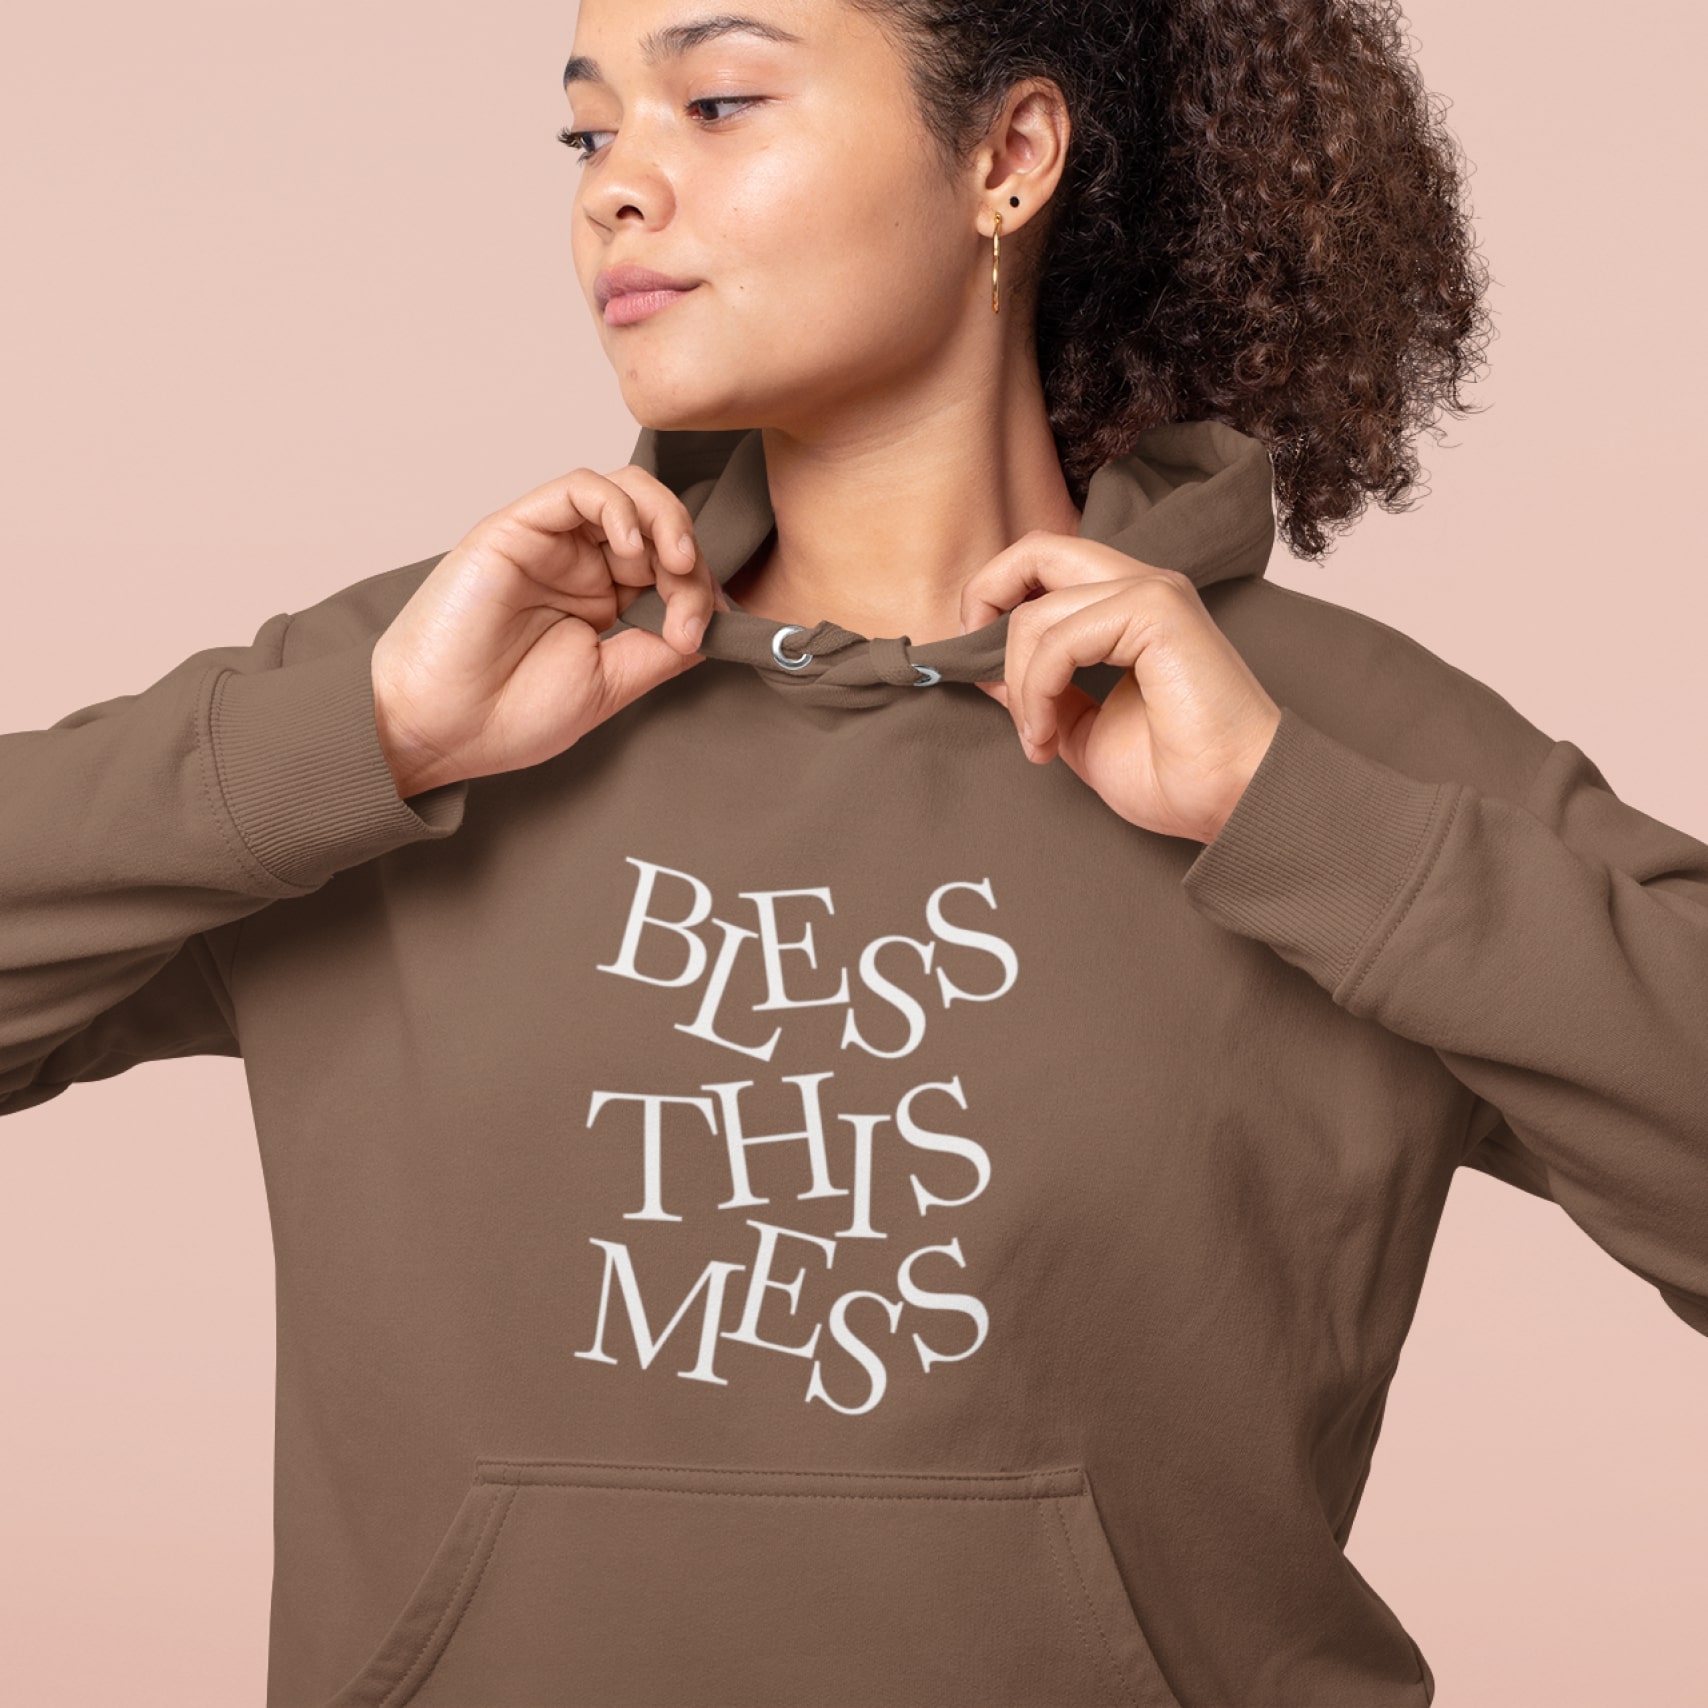 A woman wearing a custom hoodie in brown with “Bless This Mess” text on.